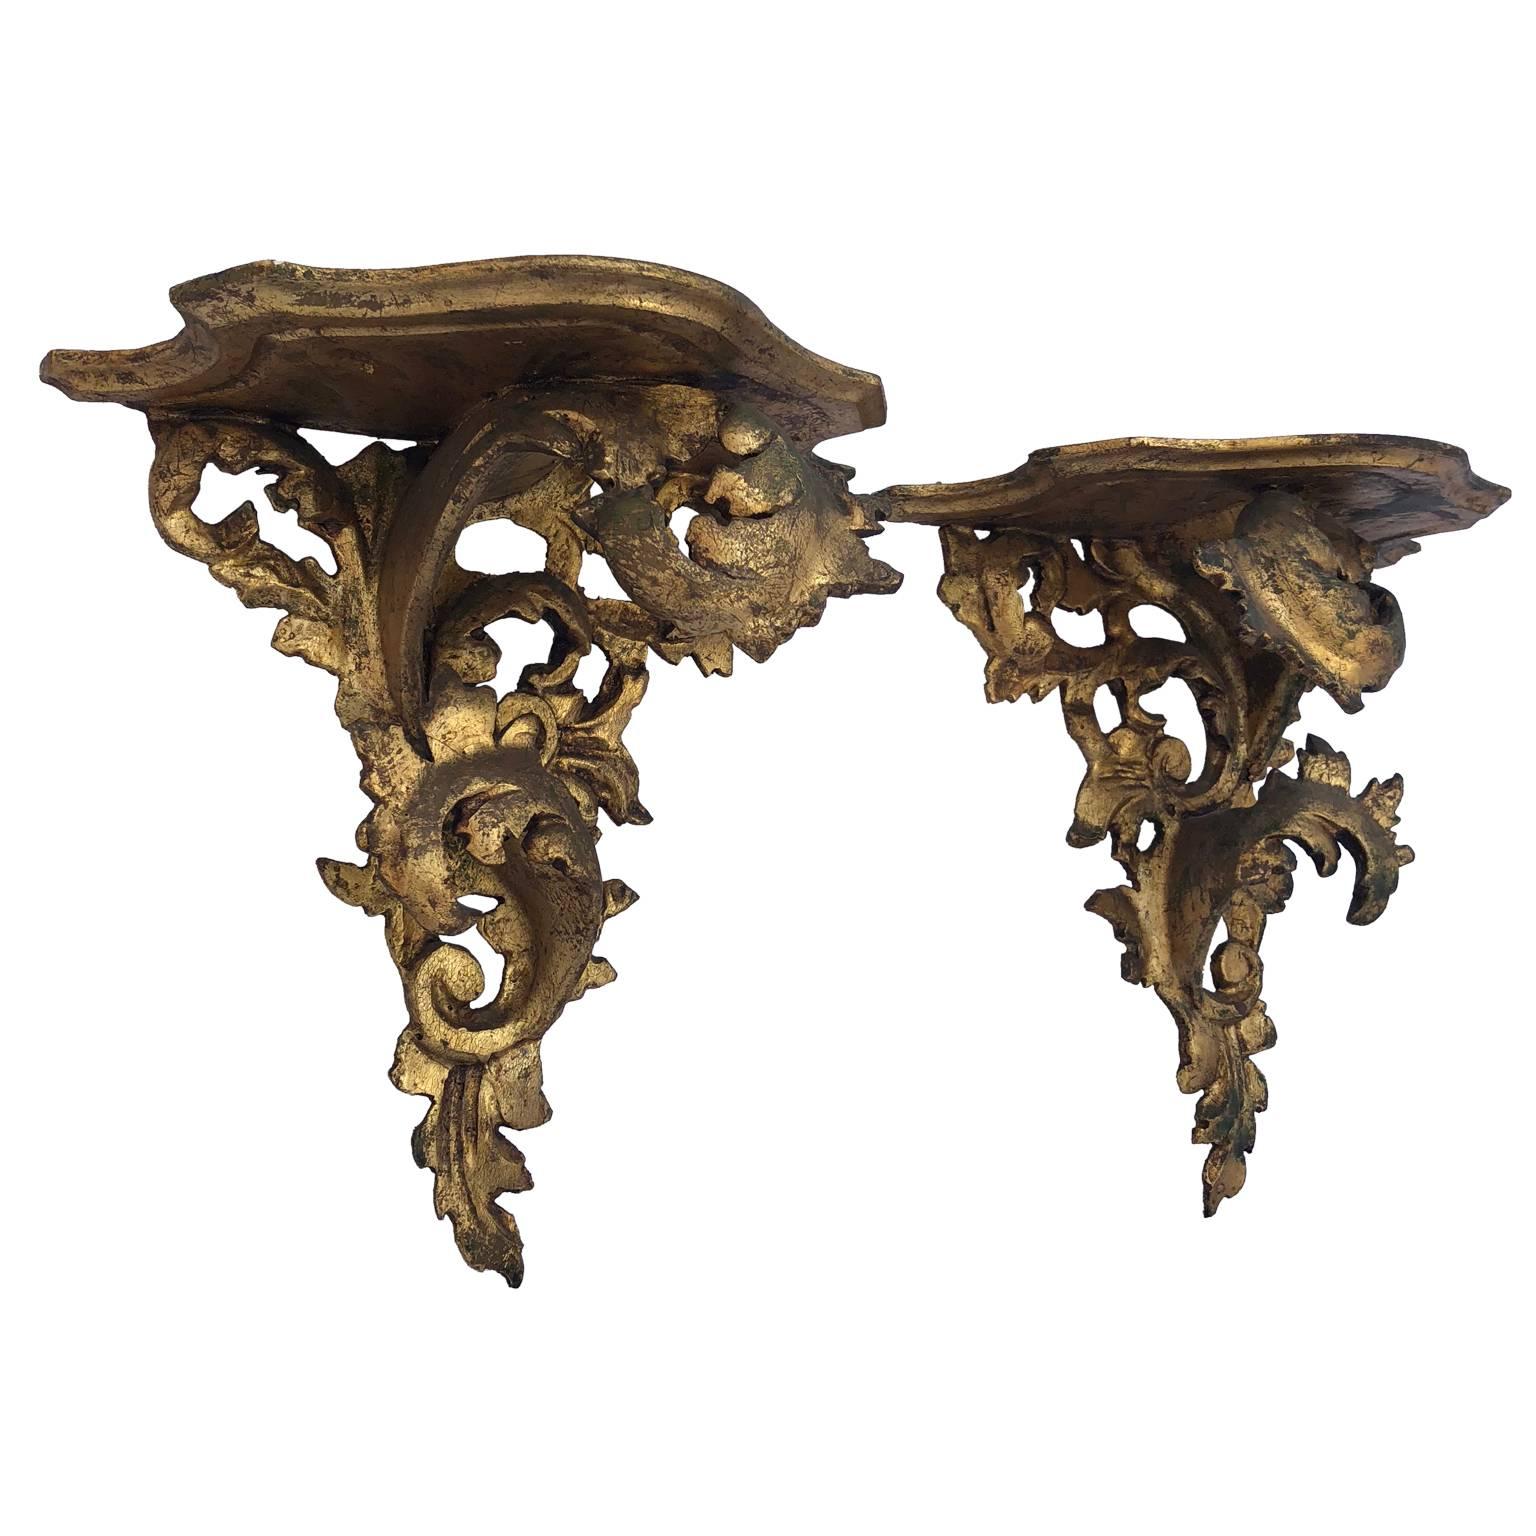 20th Century Pair of Italian Carved Wood Rococo Style Shelves or Brackets